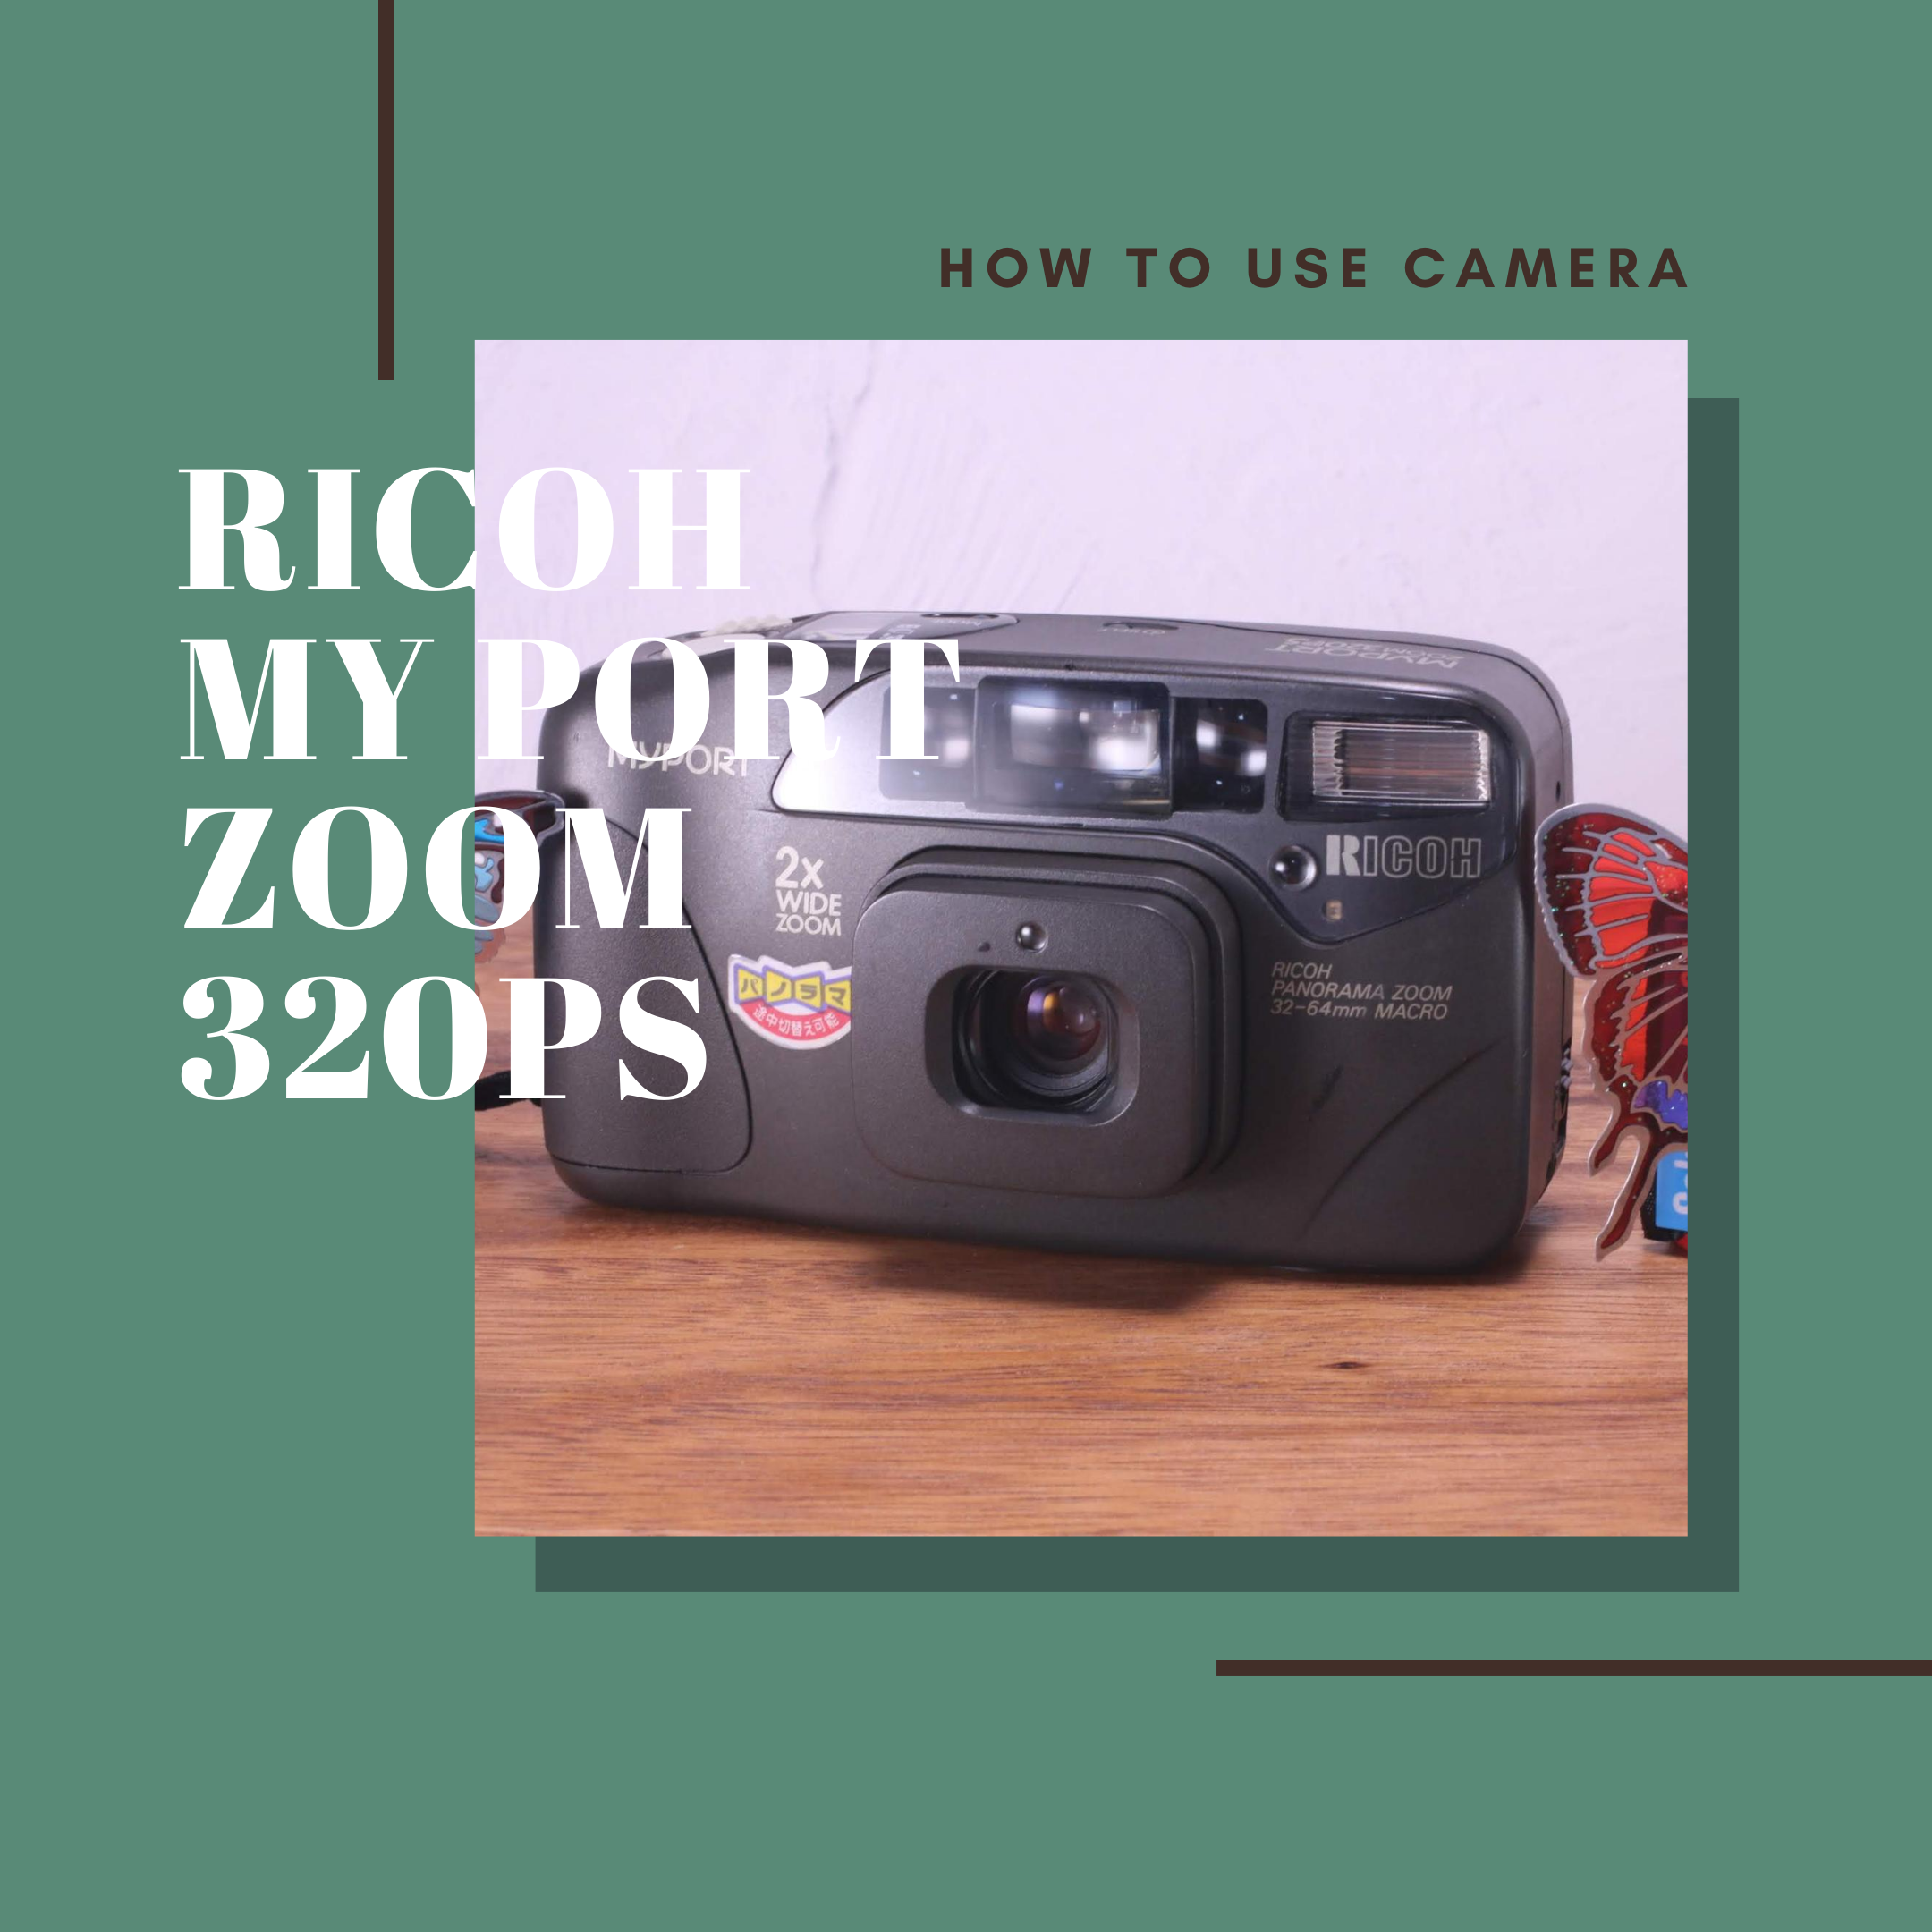 RICOH MYPORT ZOOM 320PS の使い方 | Totte Me Camera